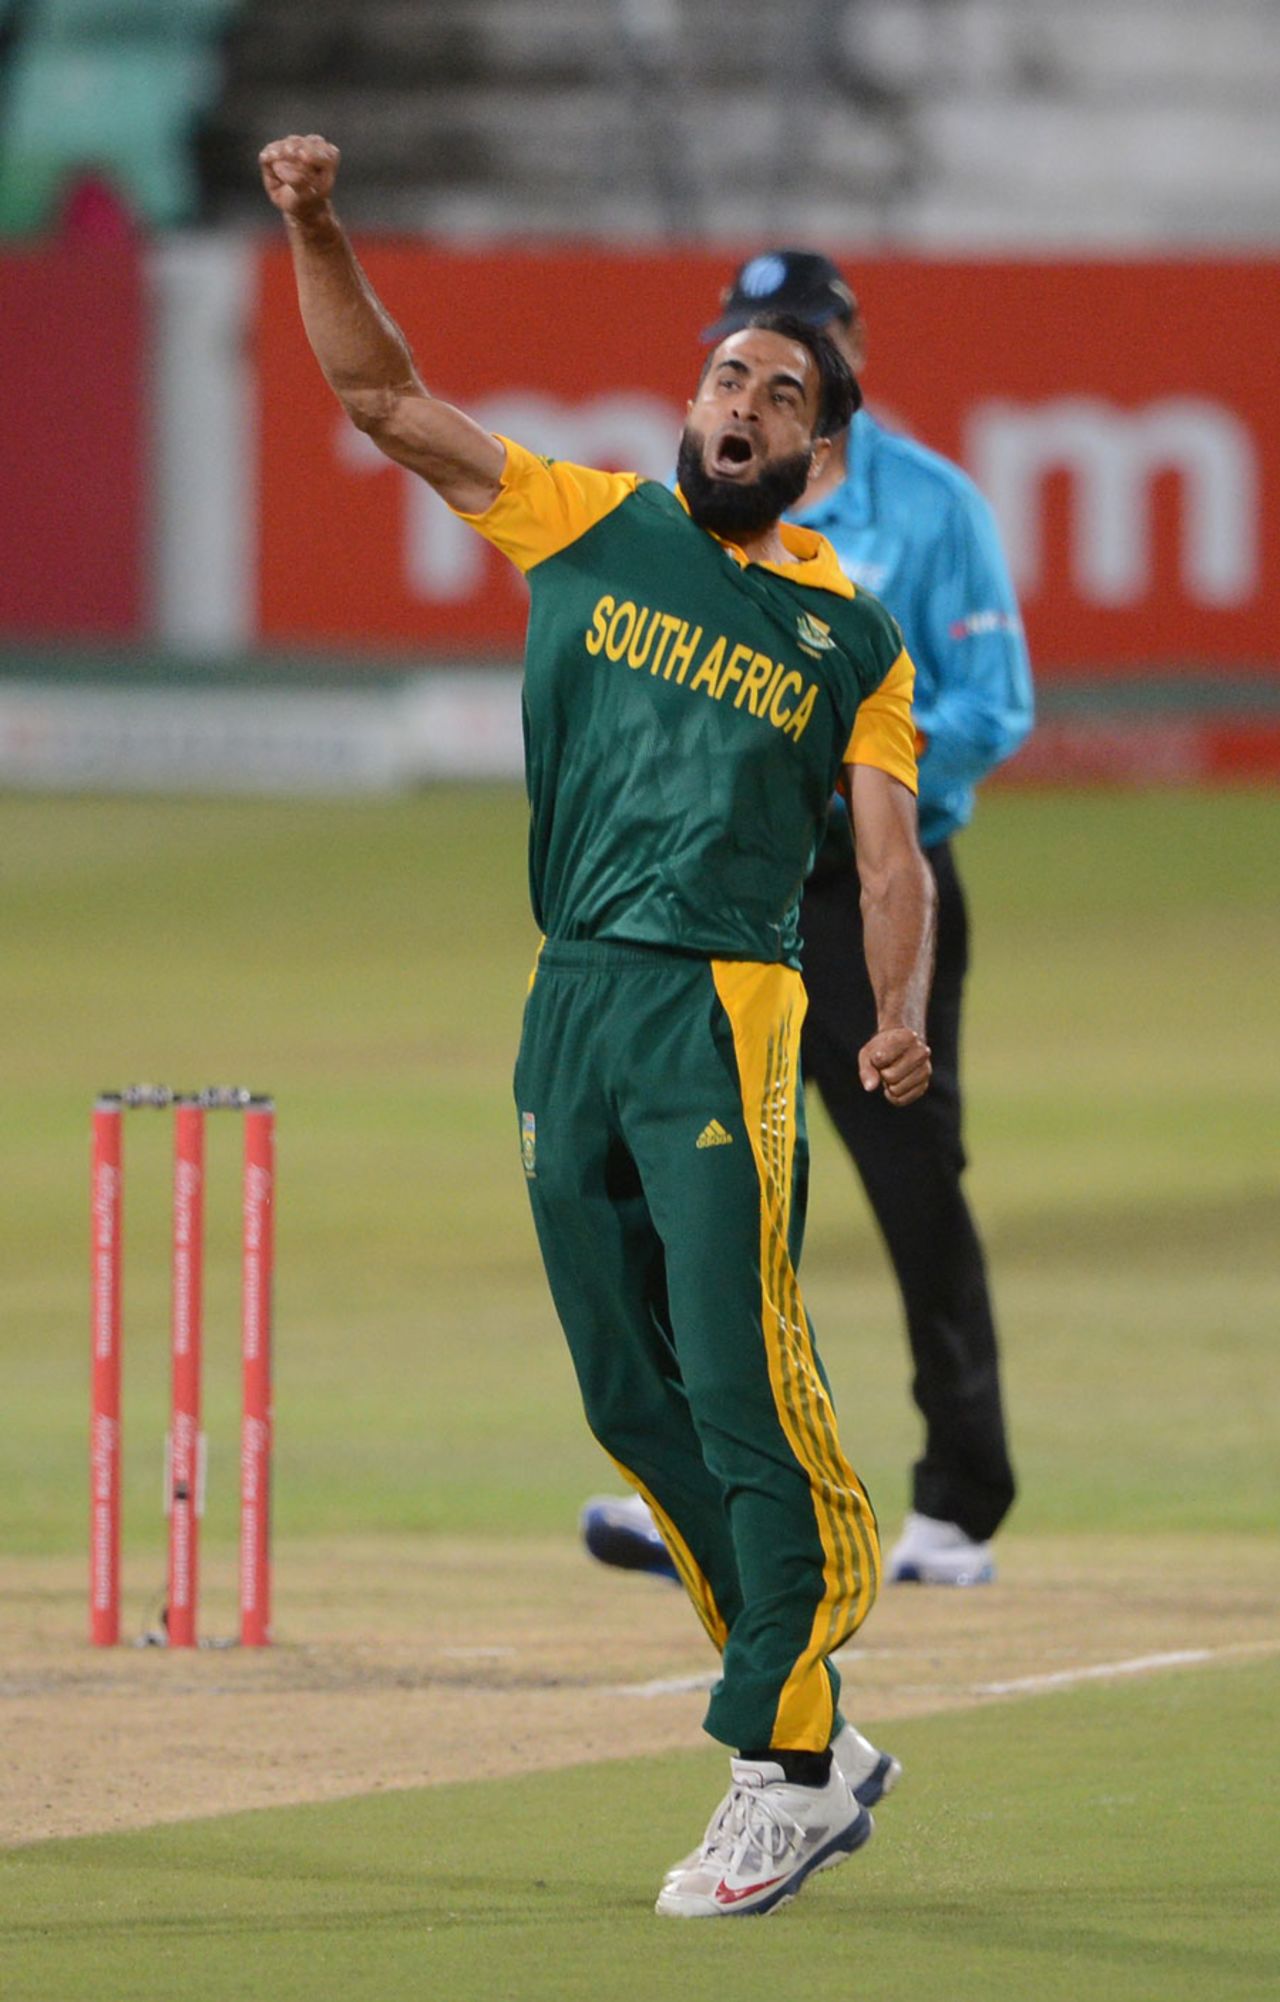 Imran Tahir celebrates one of his three wickets, South Africa v West Indies, 1st ODI, Durban, January 16, 2015